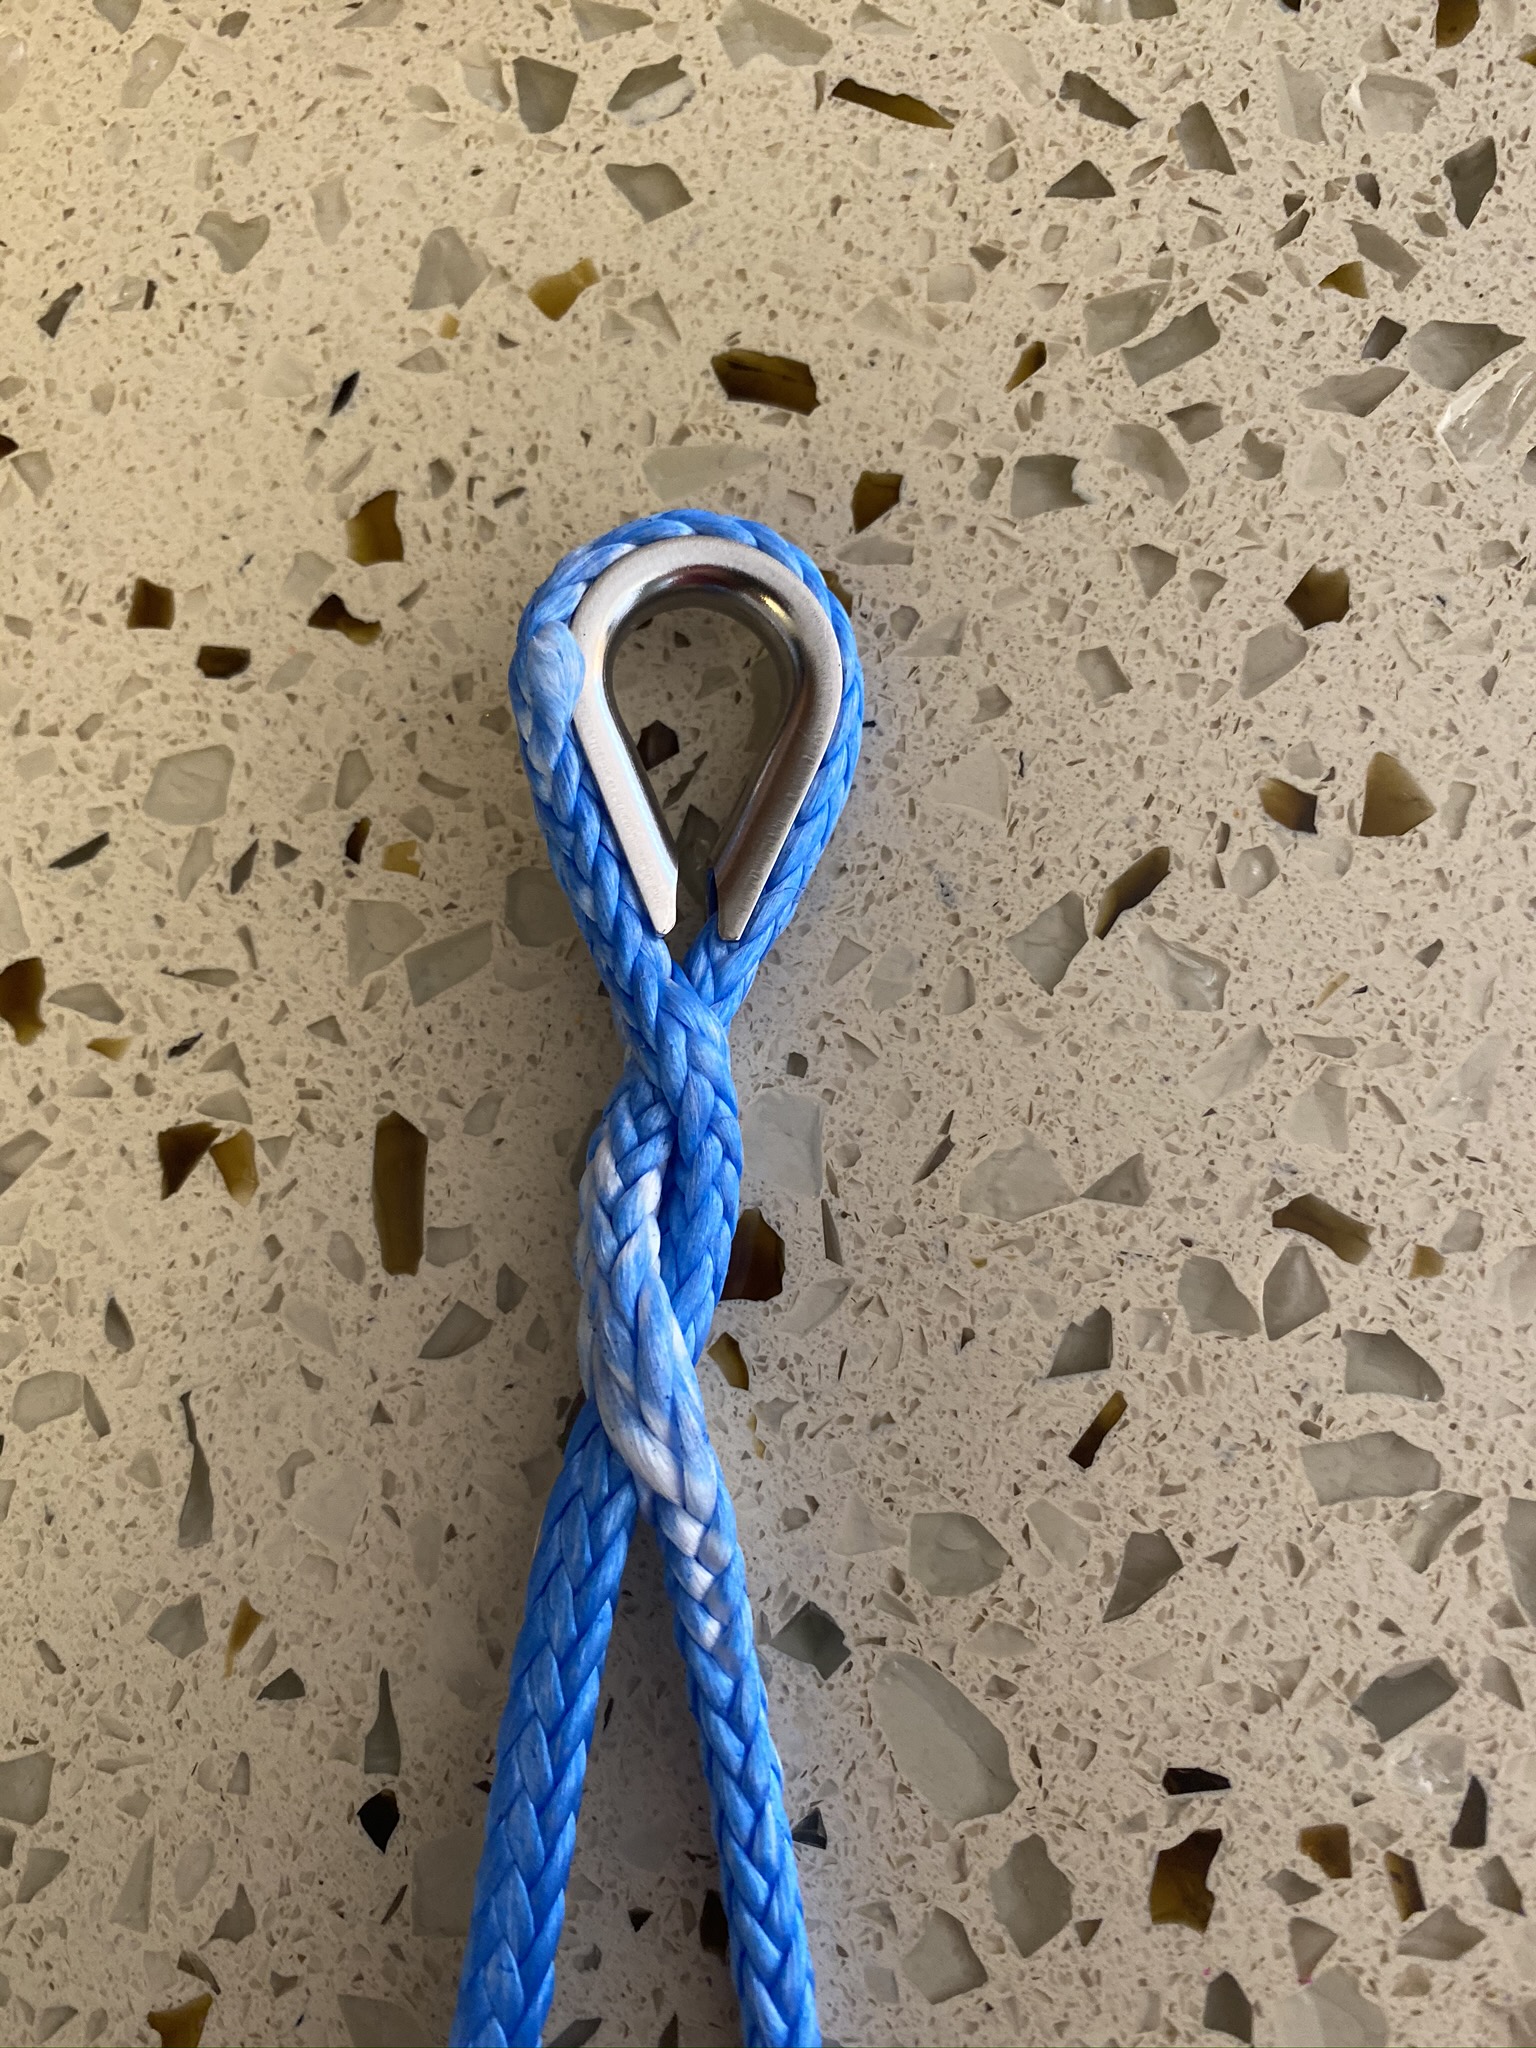 Dyneema 12 strand line splicing – Interested in Learning How to Find,  Select and Eventually Live On Board Your Own Sailboat? You're in the Right  Place….